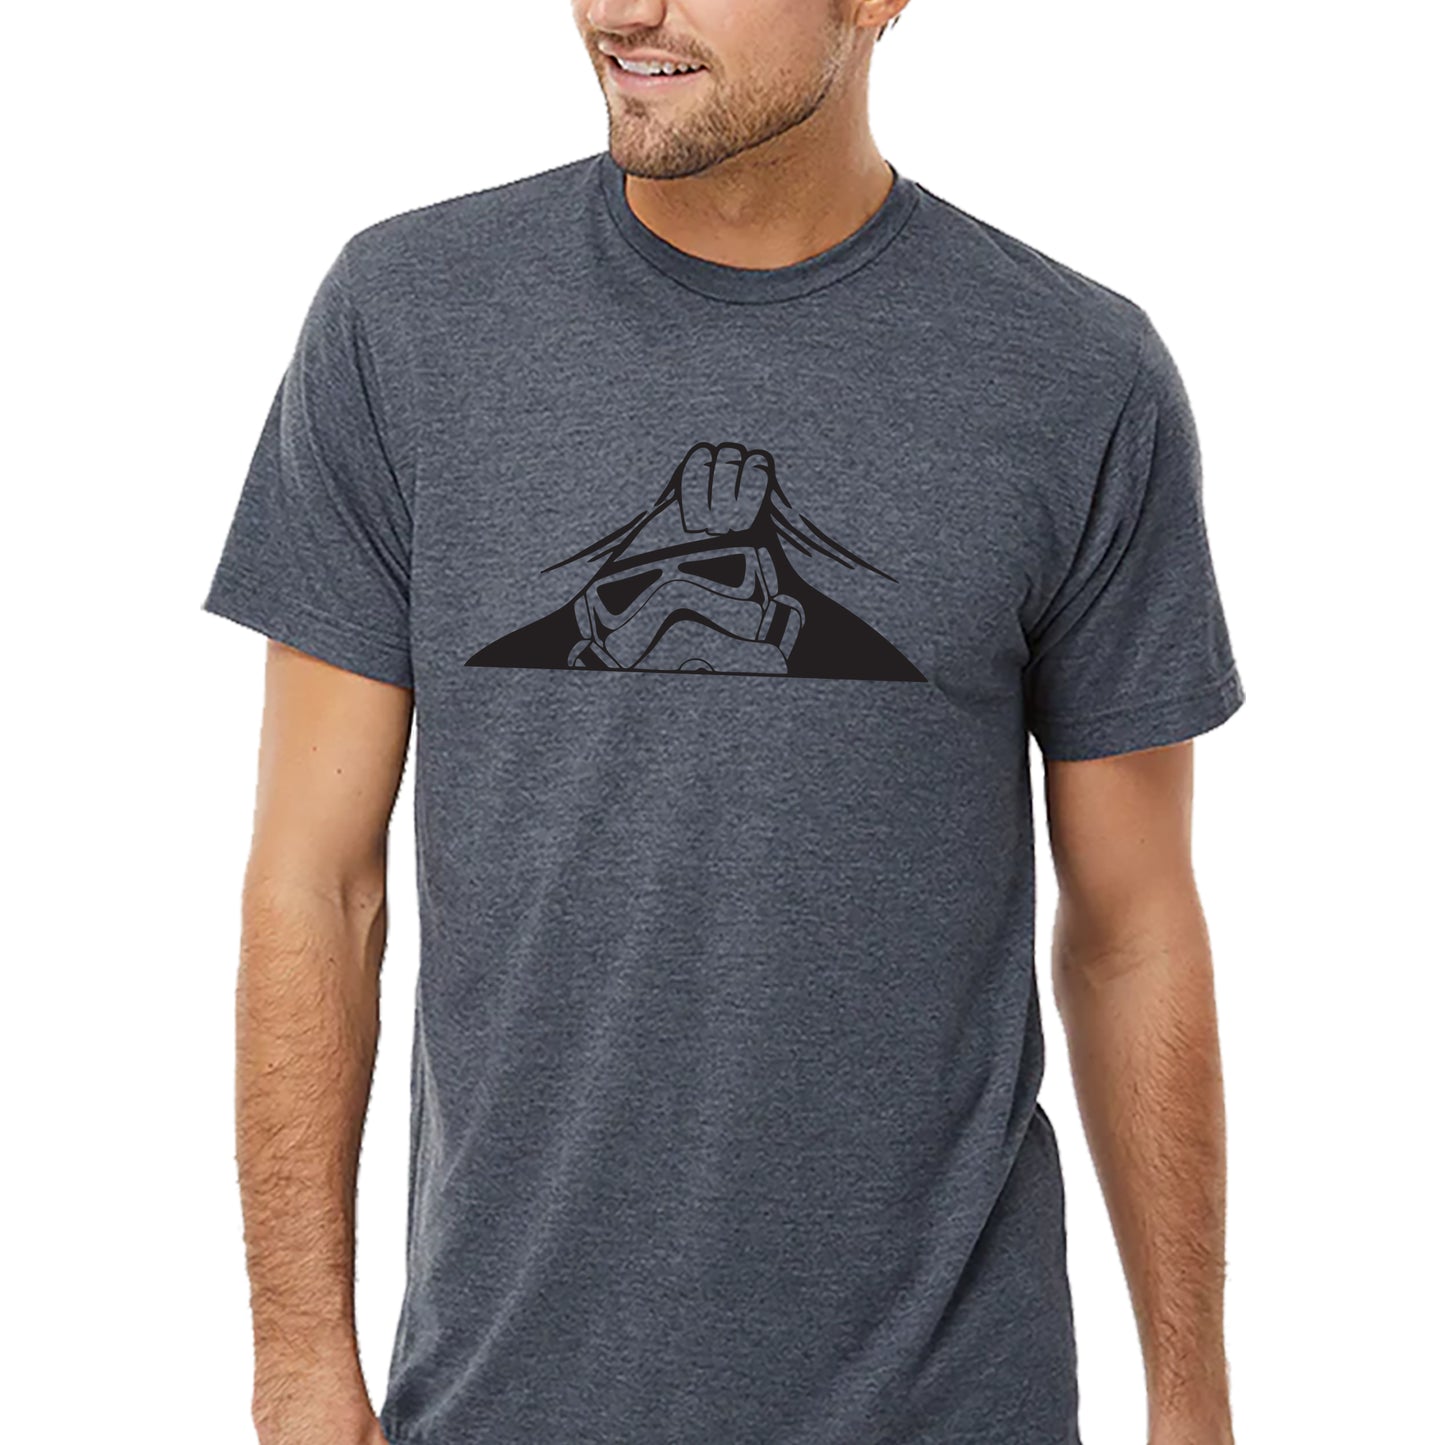 Scared Stormtrooper T-shirt